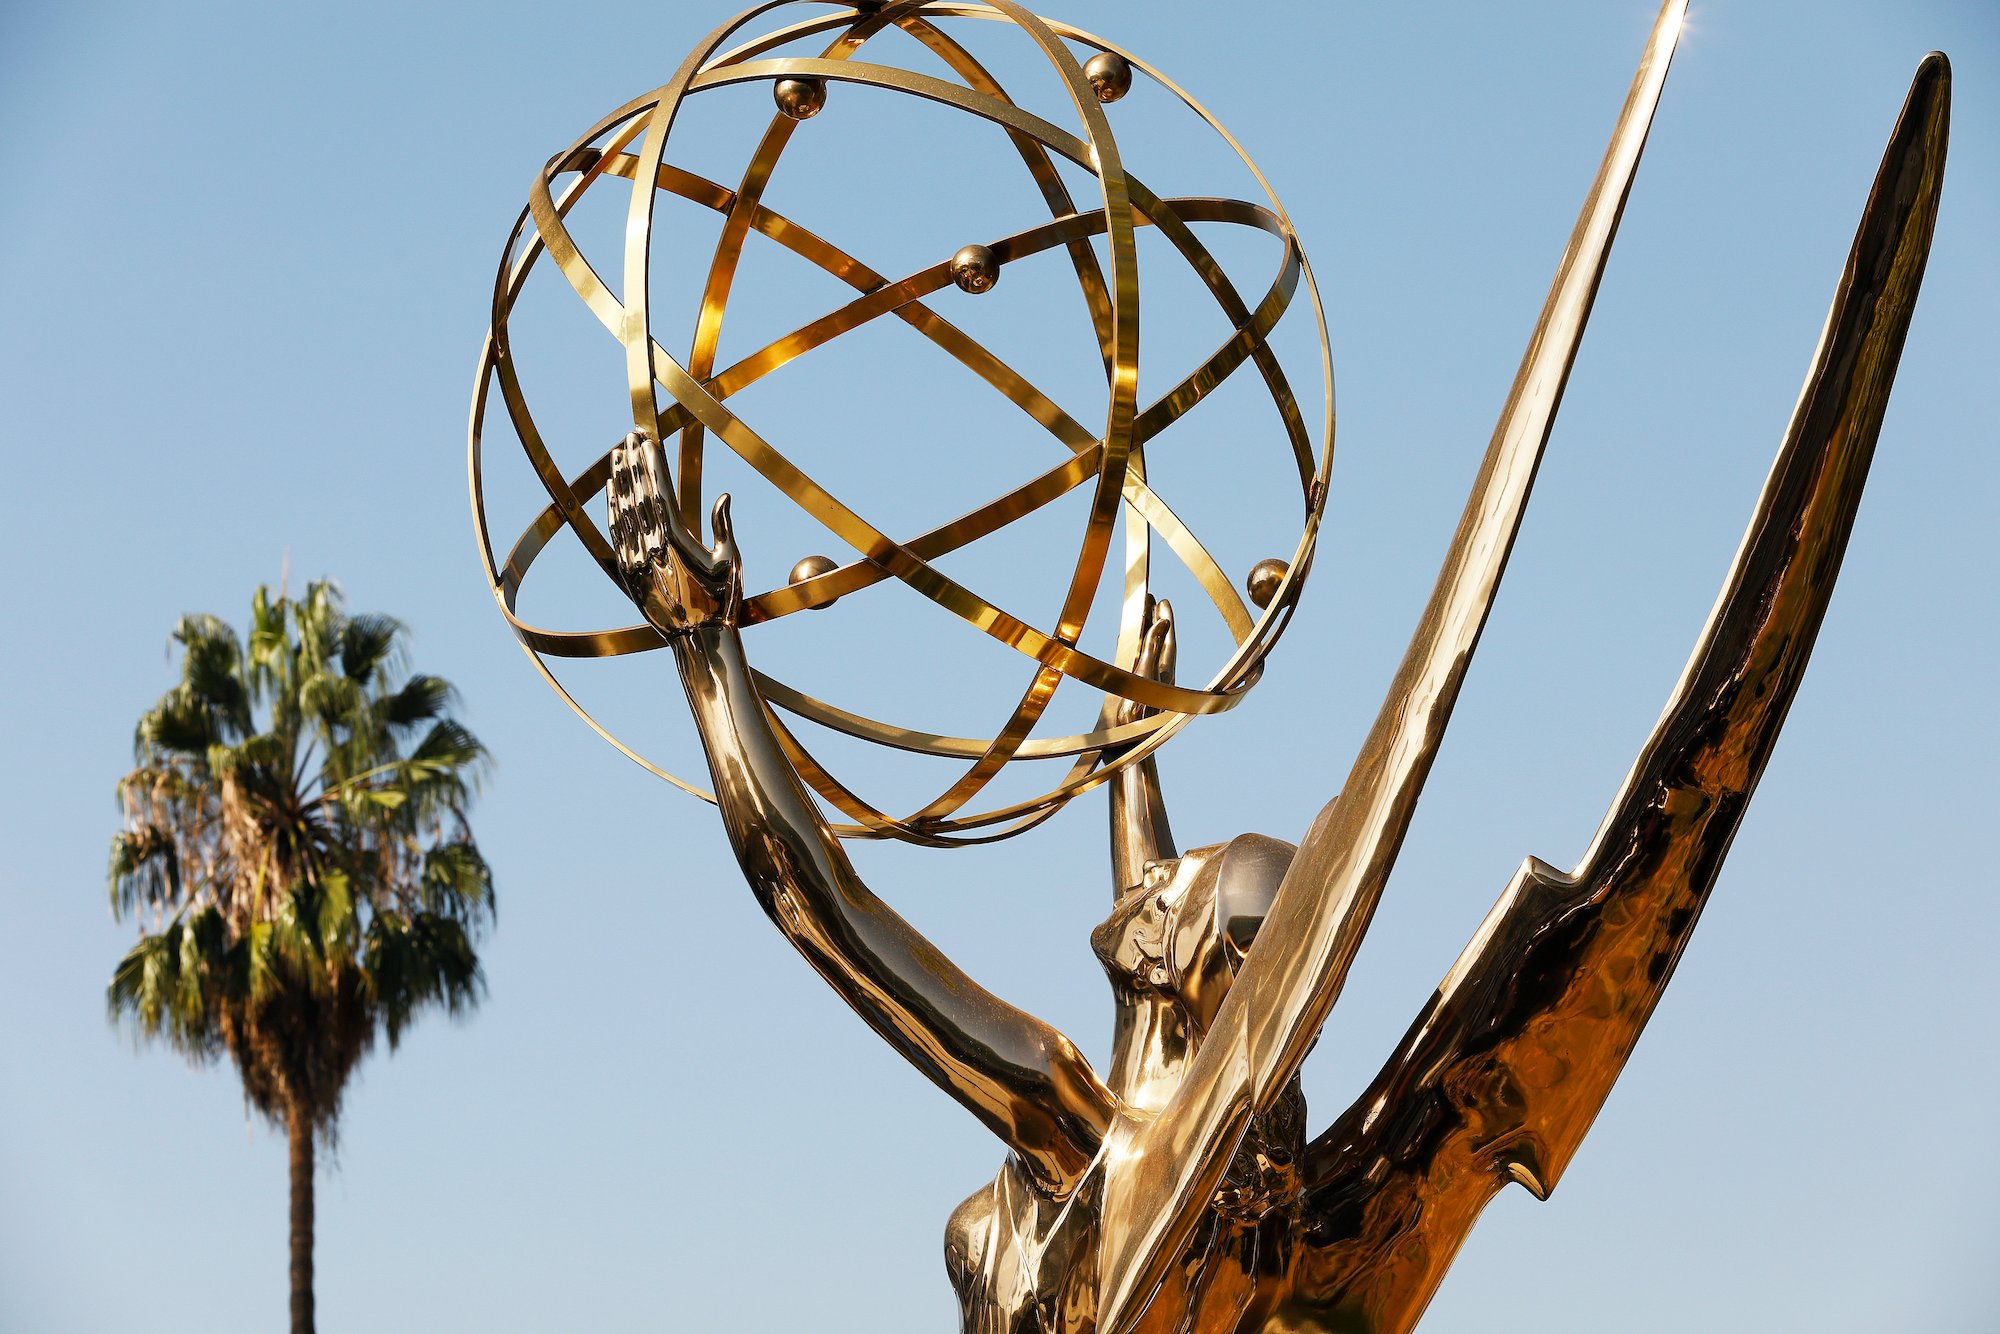 The Emmy Award statue with a palm tree in the background at the Academy of Television Arts & Sciences campus in Los Angeles